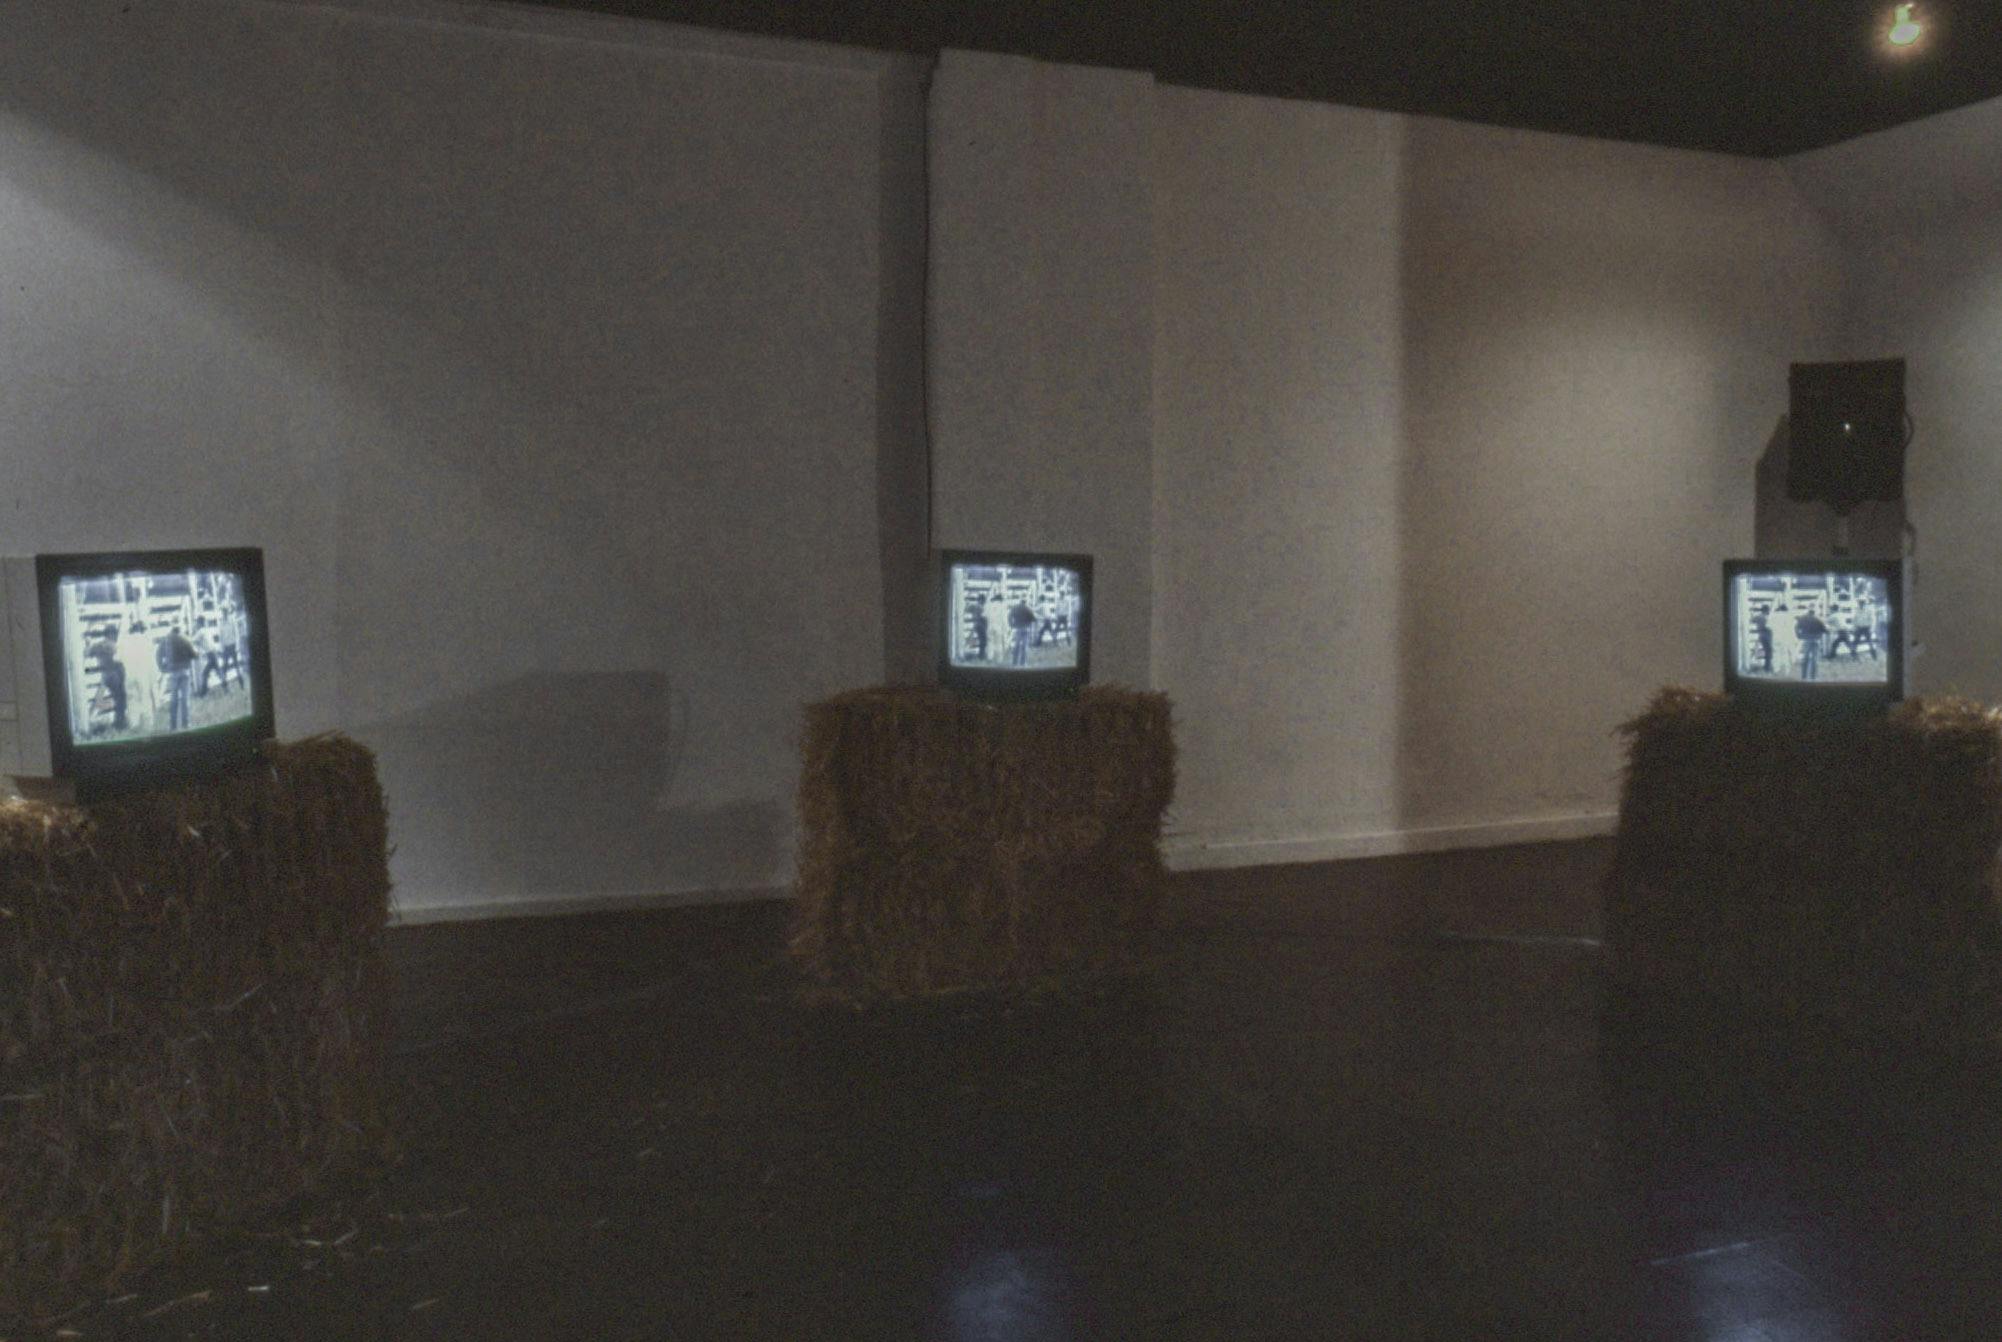 In a dark gallery space, 3 bales of hay on the floor hold a tube TV atop them. The TVs are playing the same video synchronously, showing a group of people at a barn.